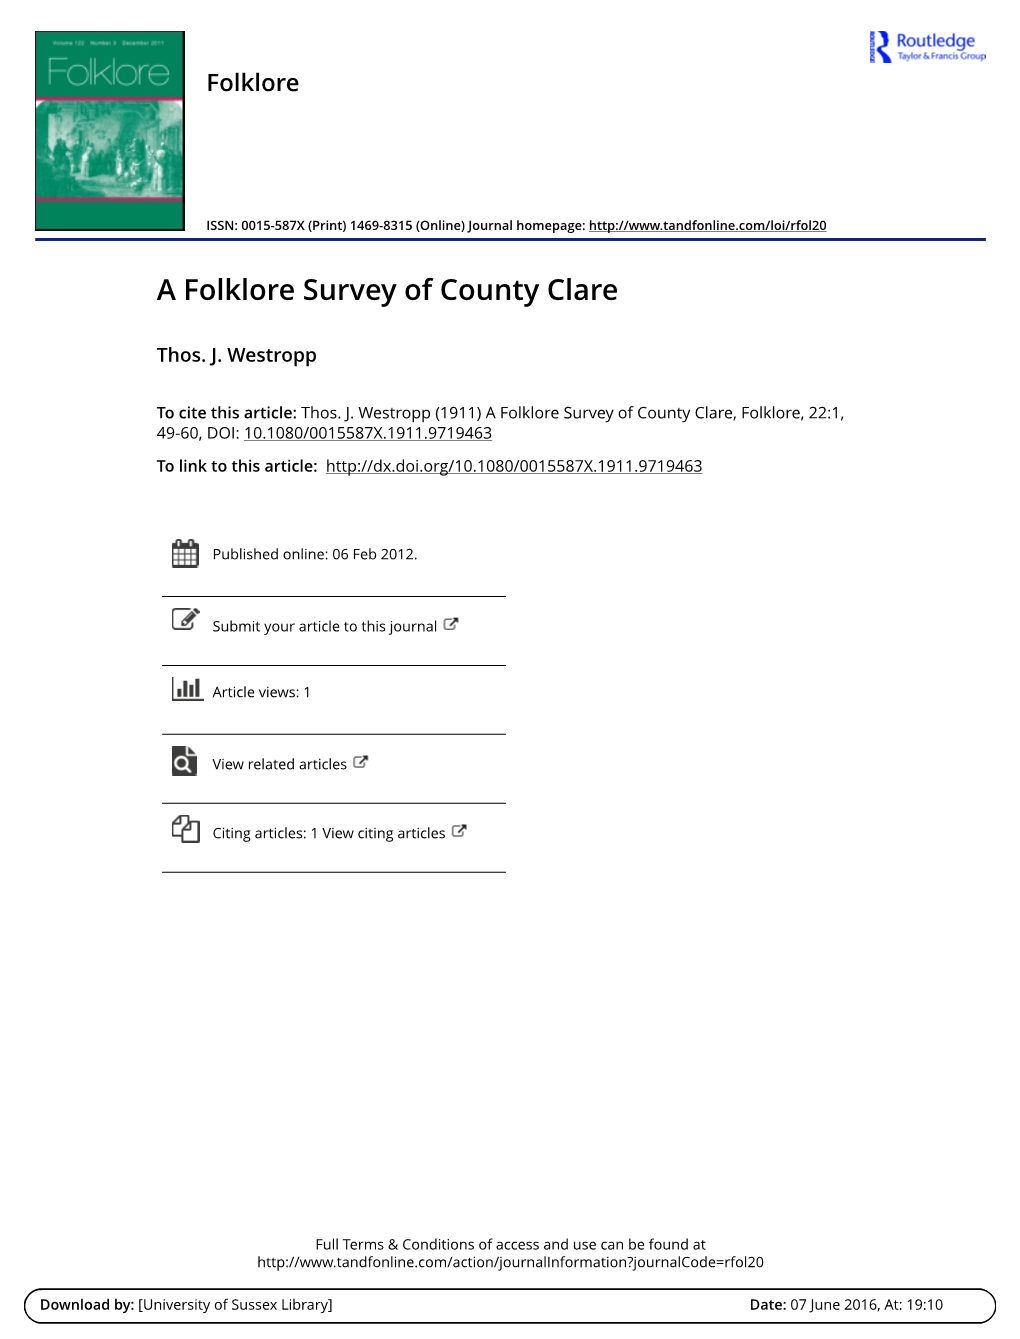 A Folklore Survey of County Clare